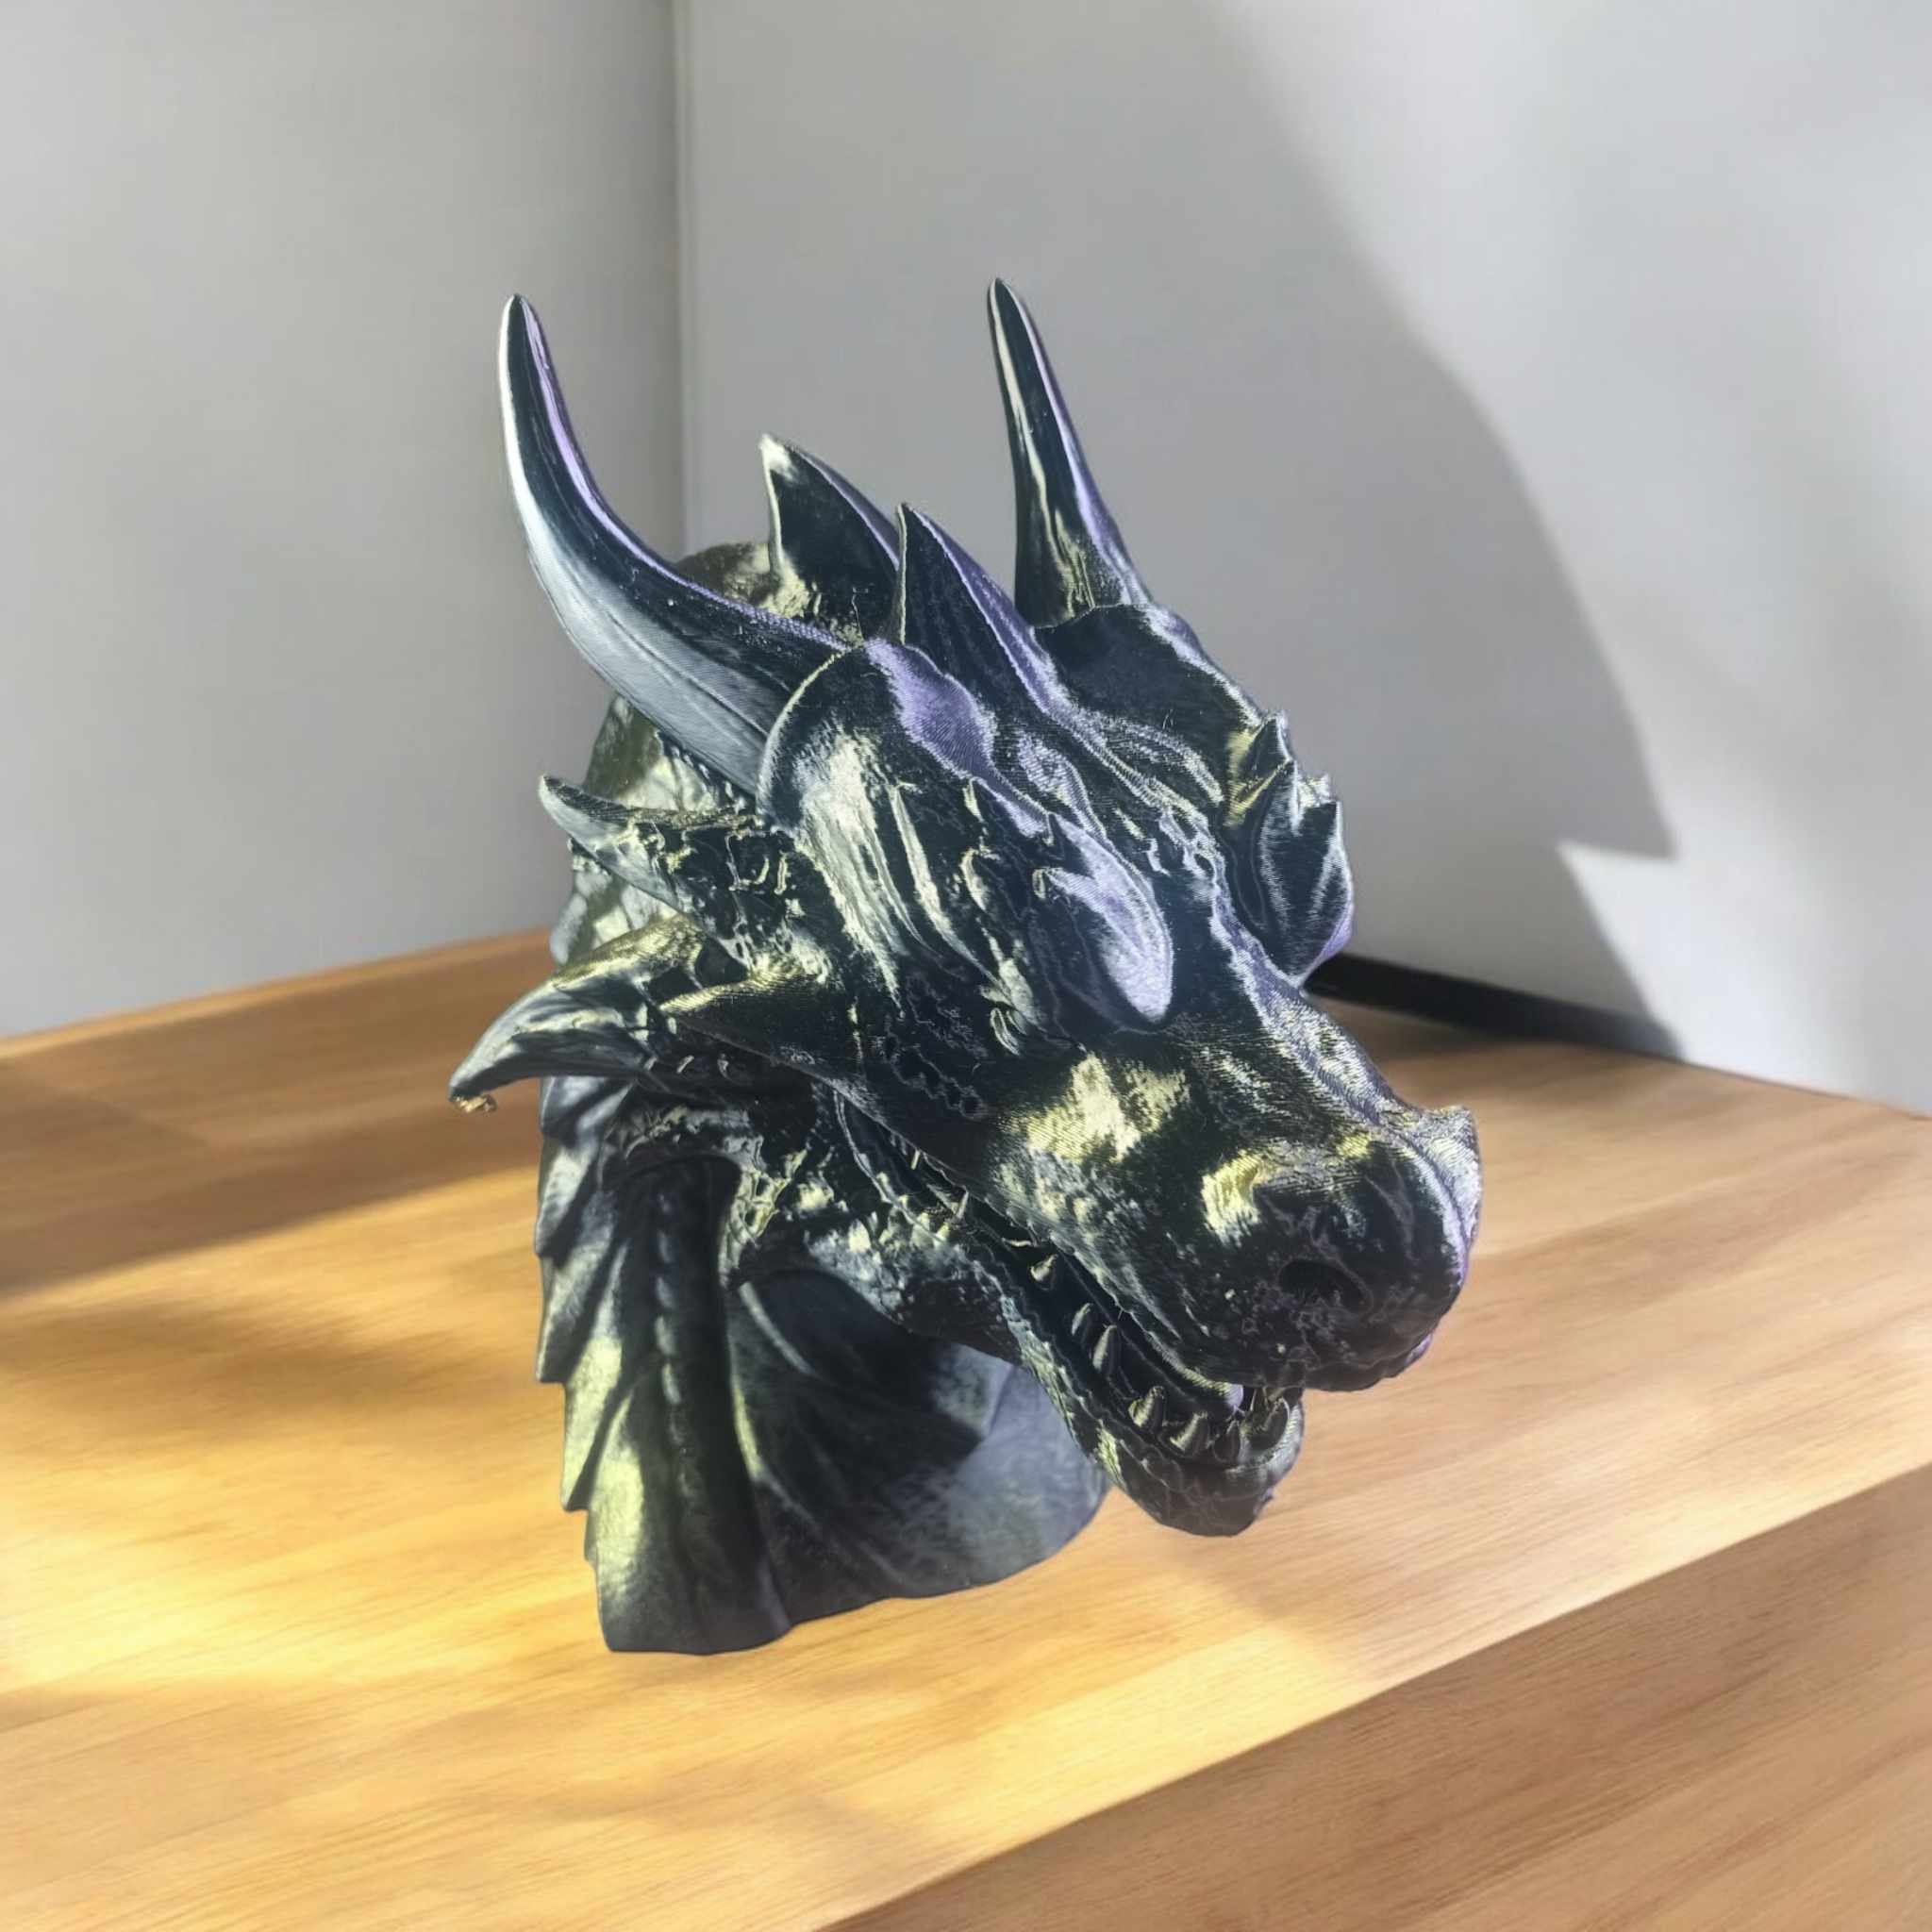 Dragon Head Bust 3D Printed, Detailed Fantasy Sculpt for Home Decor, Unique Gift for Dragon Enthusiasts